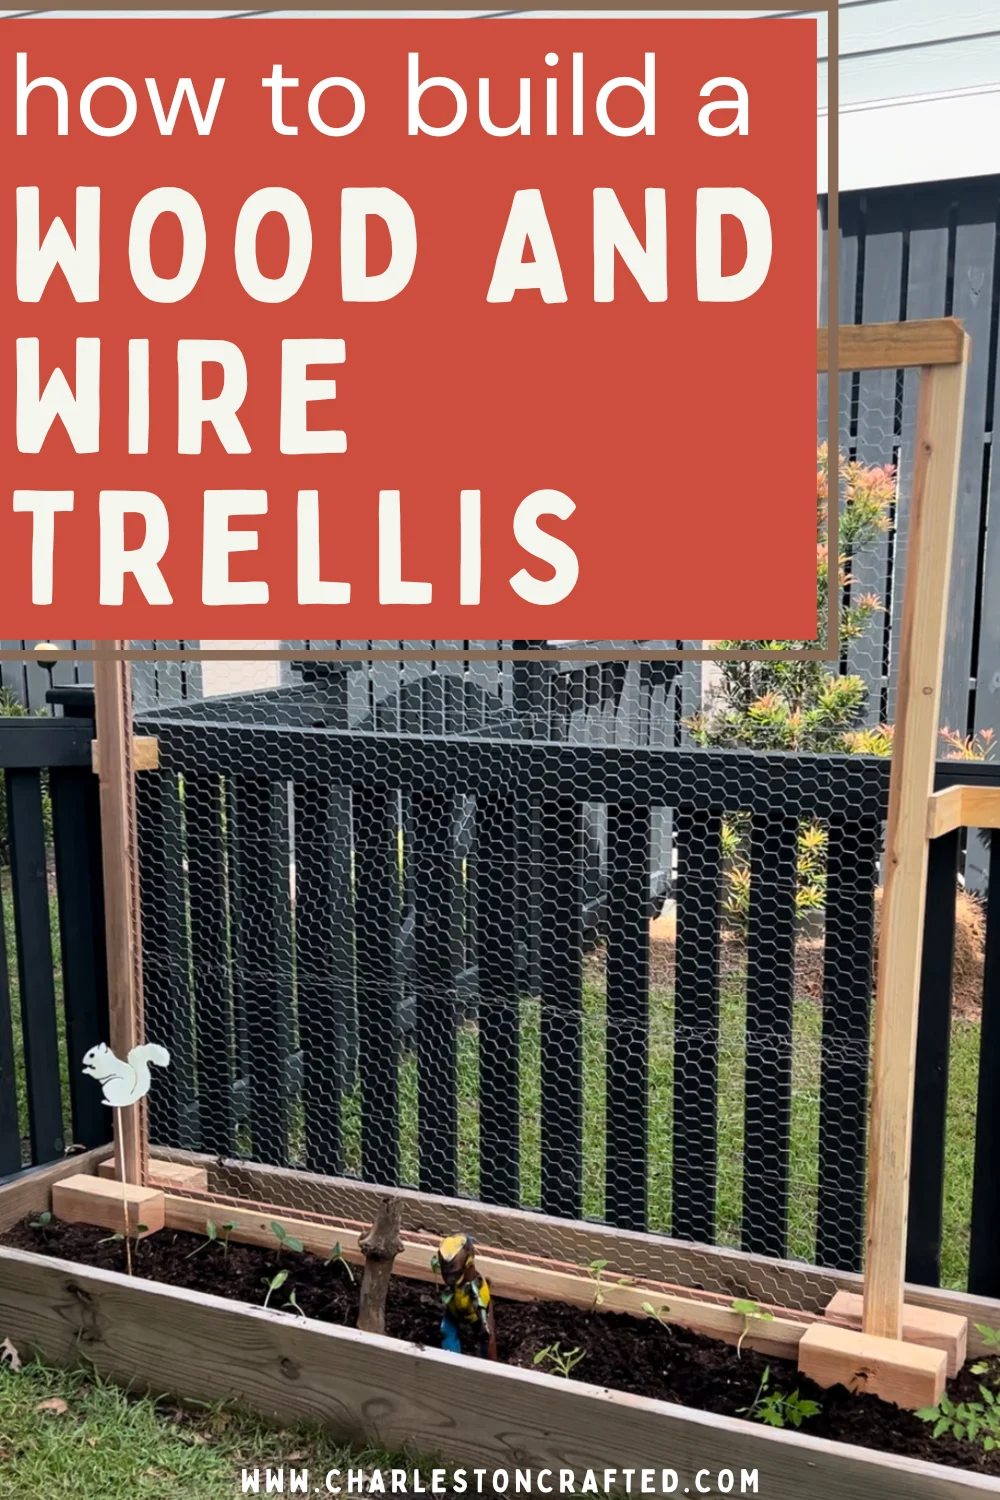 How to build a simple wire garden trellis - Charleston Crafted